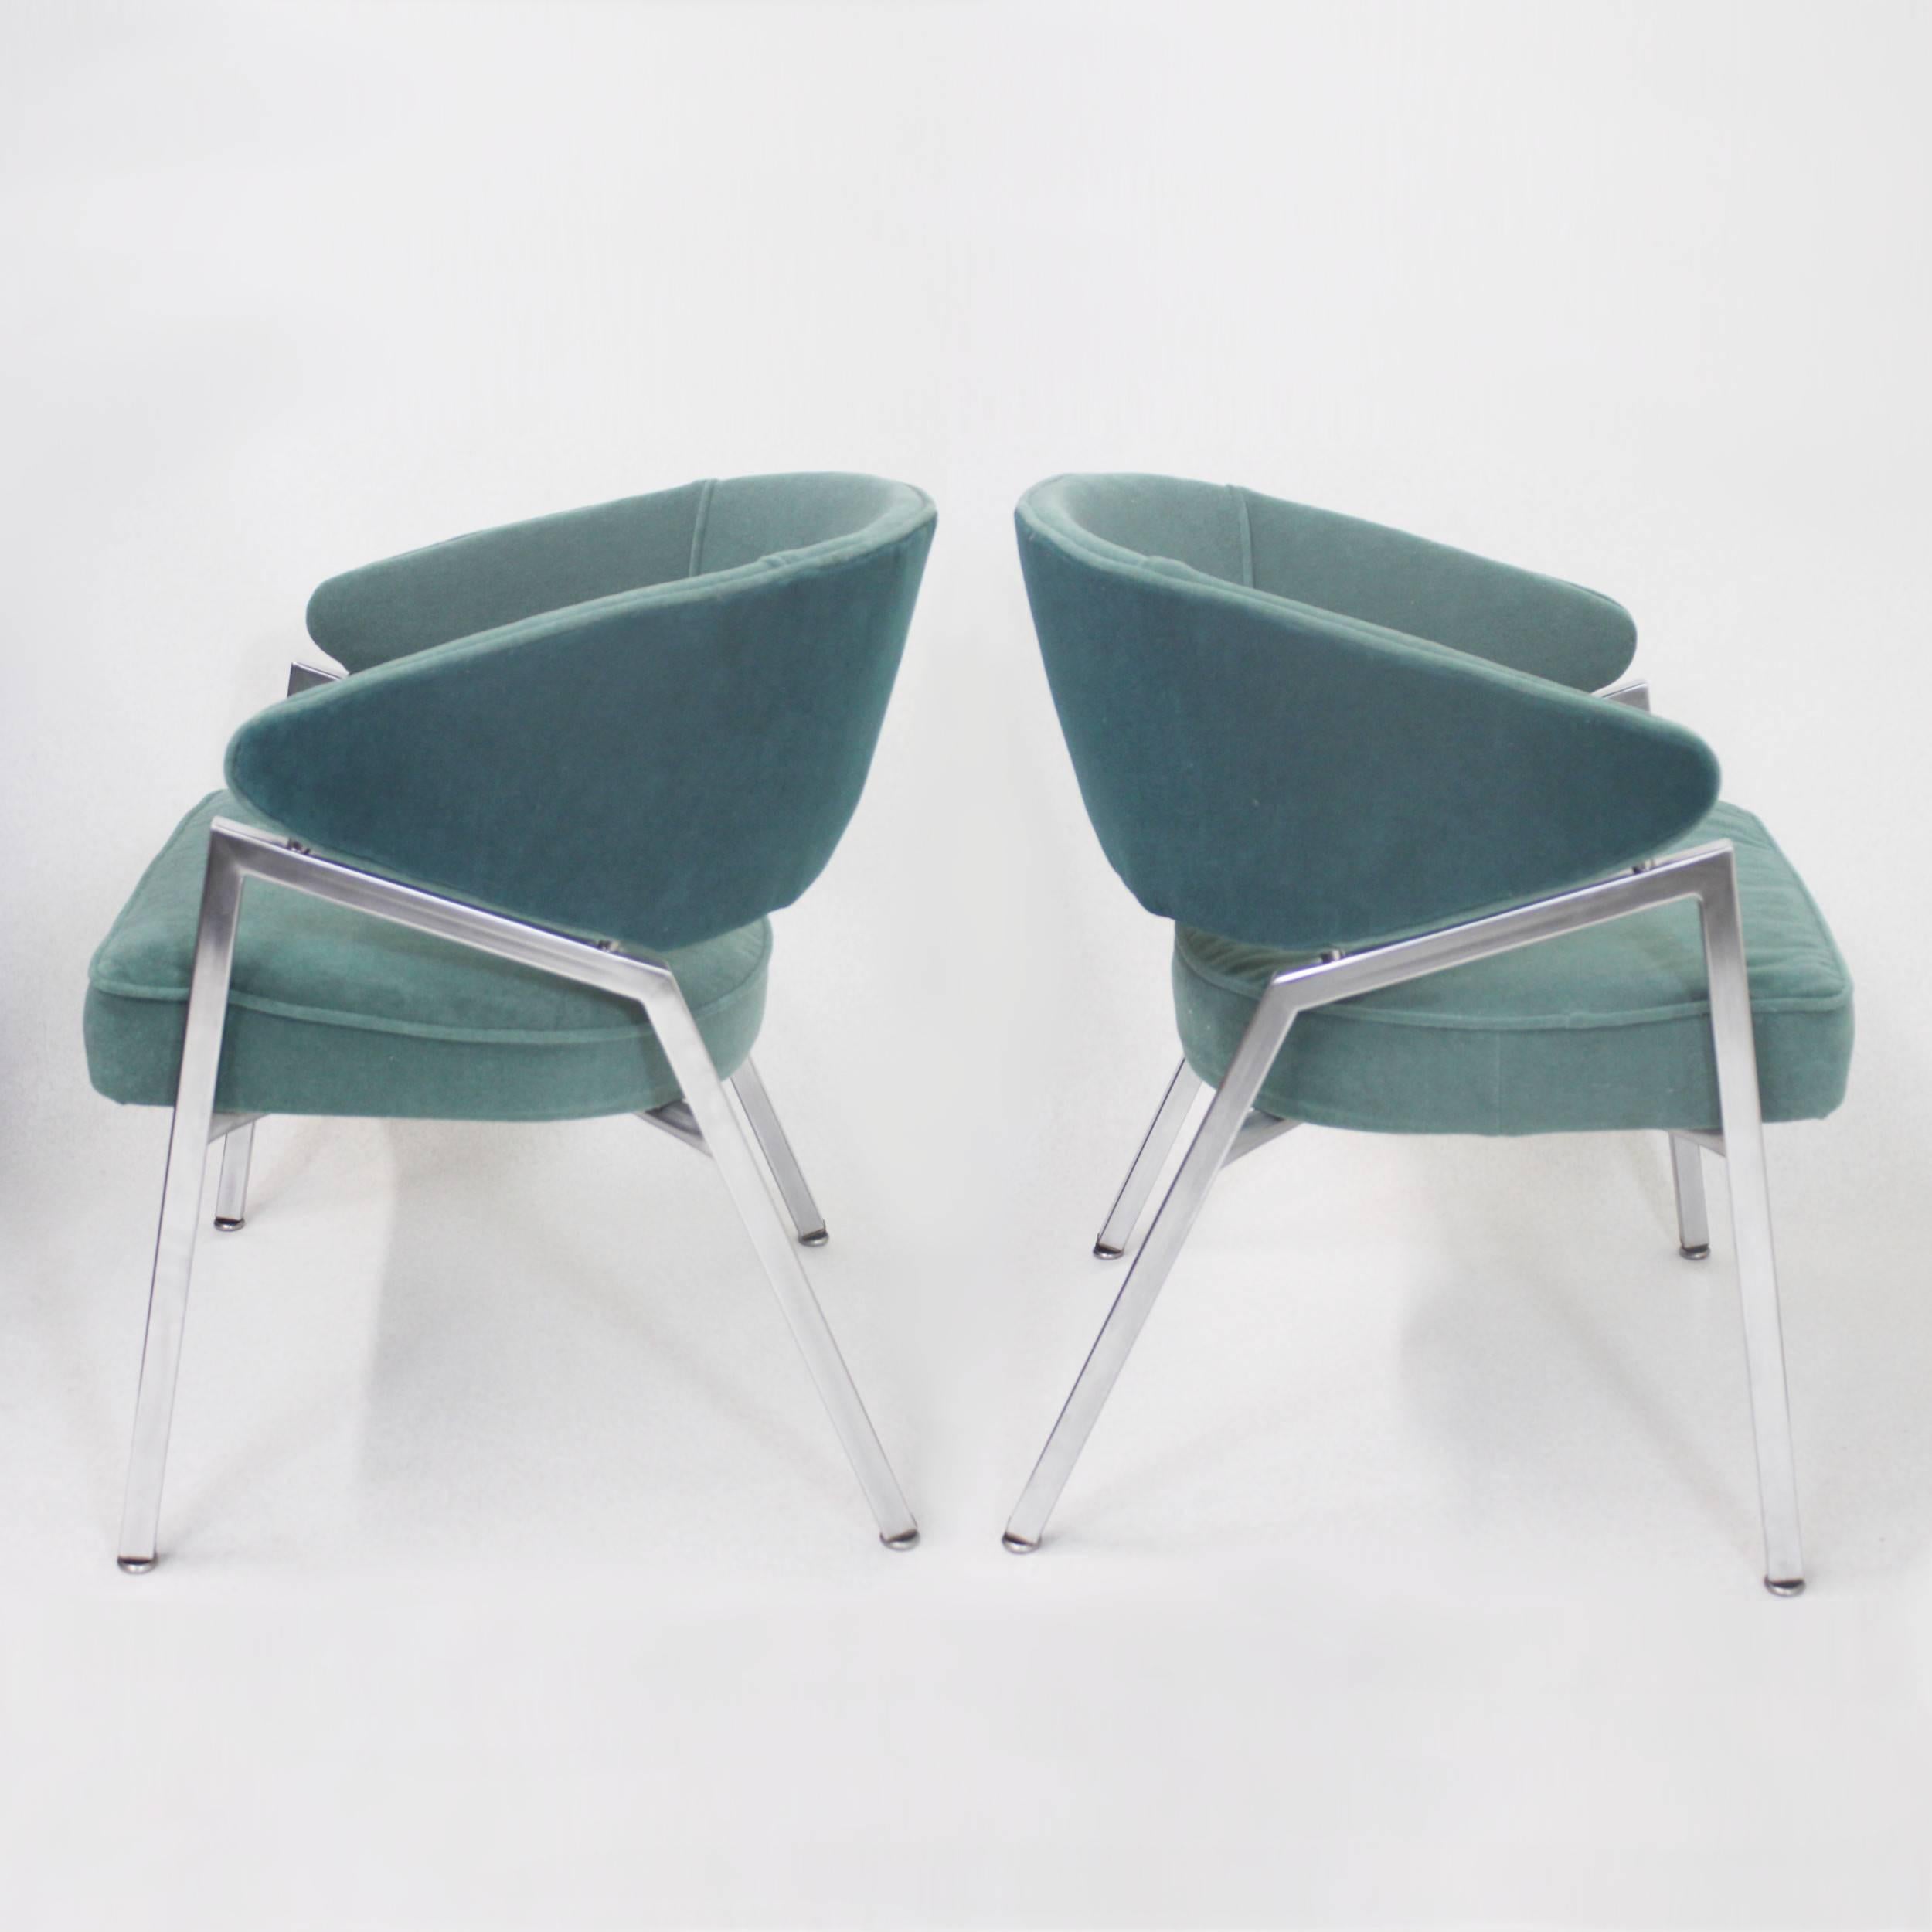 American Rare Pair of 1970s Mid-Century Modern Teal Green and Chrome Side Armchairs